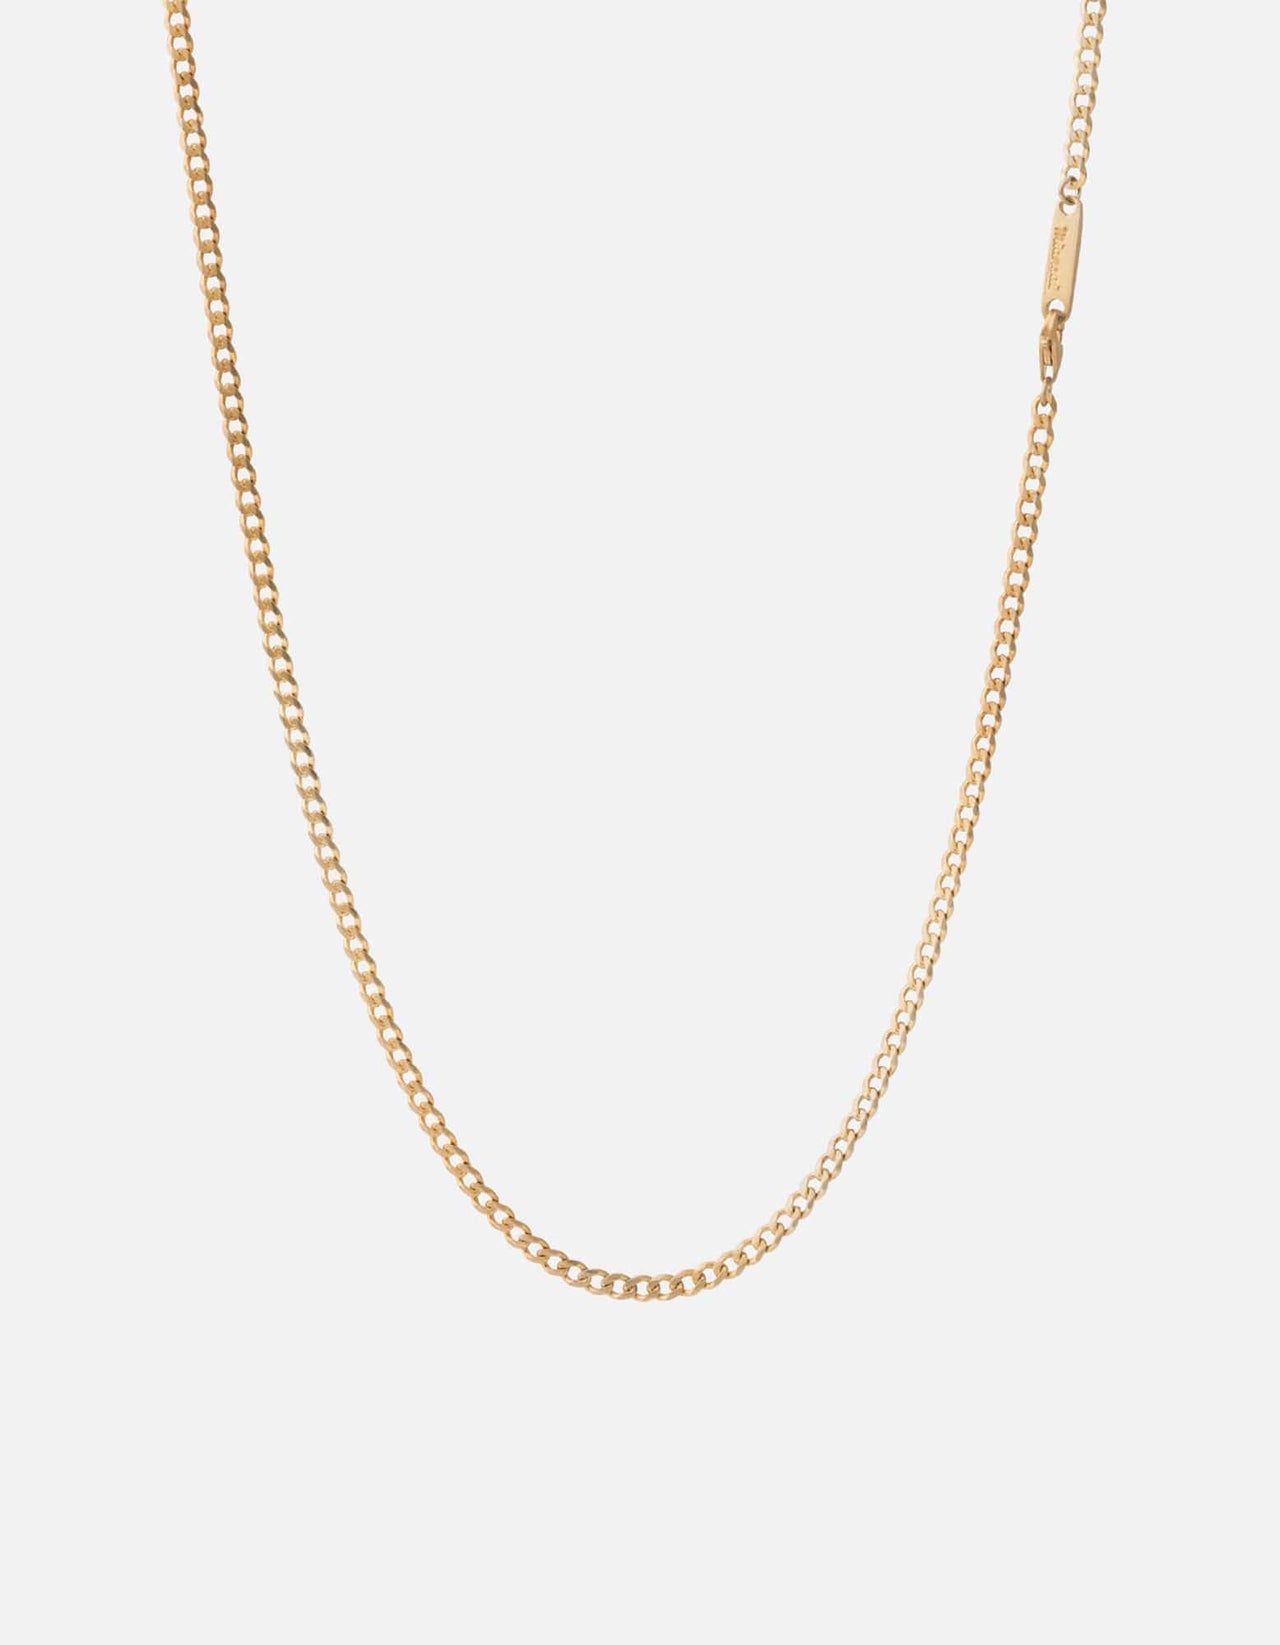 Italian Gold 3.8mm Sparkle Rope Chain Necklace in 14K Gold - 18